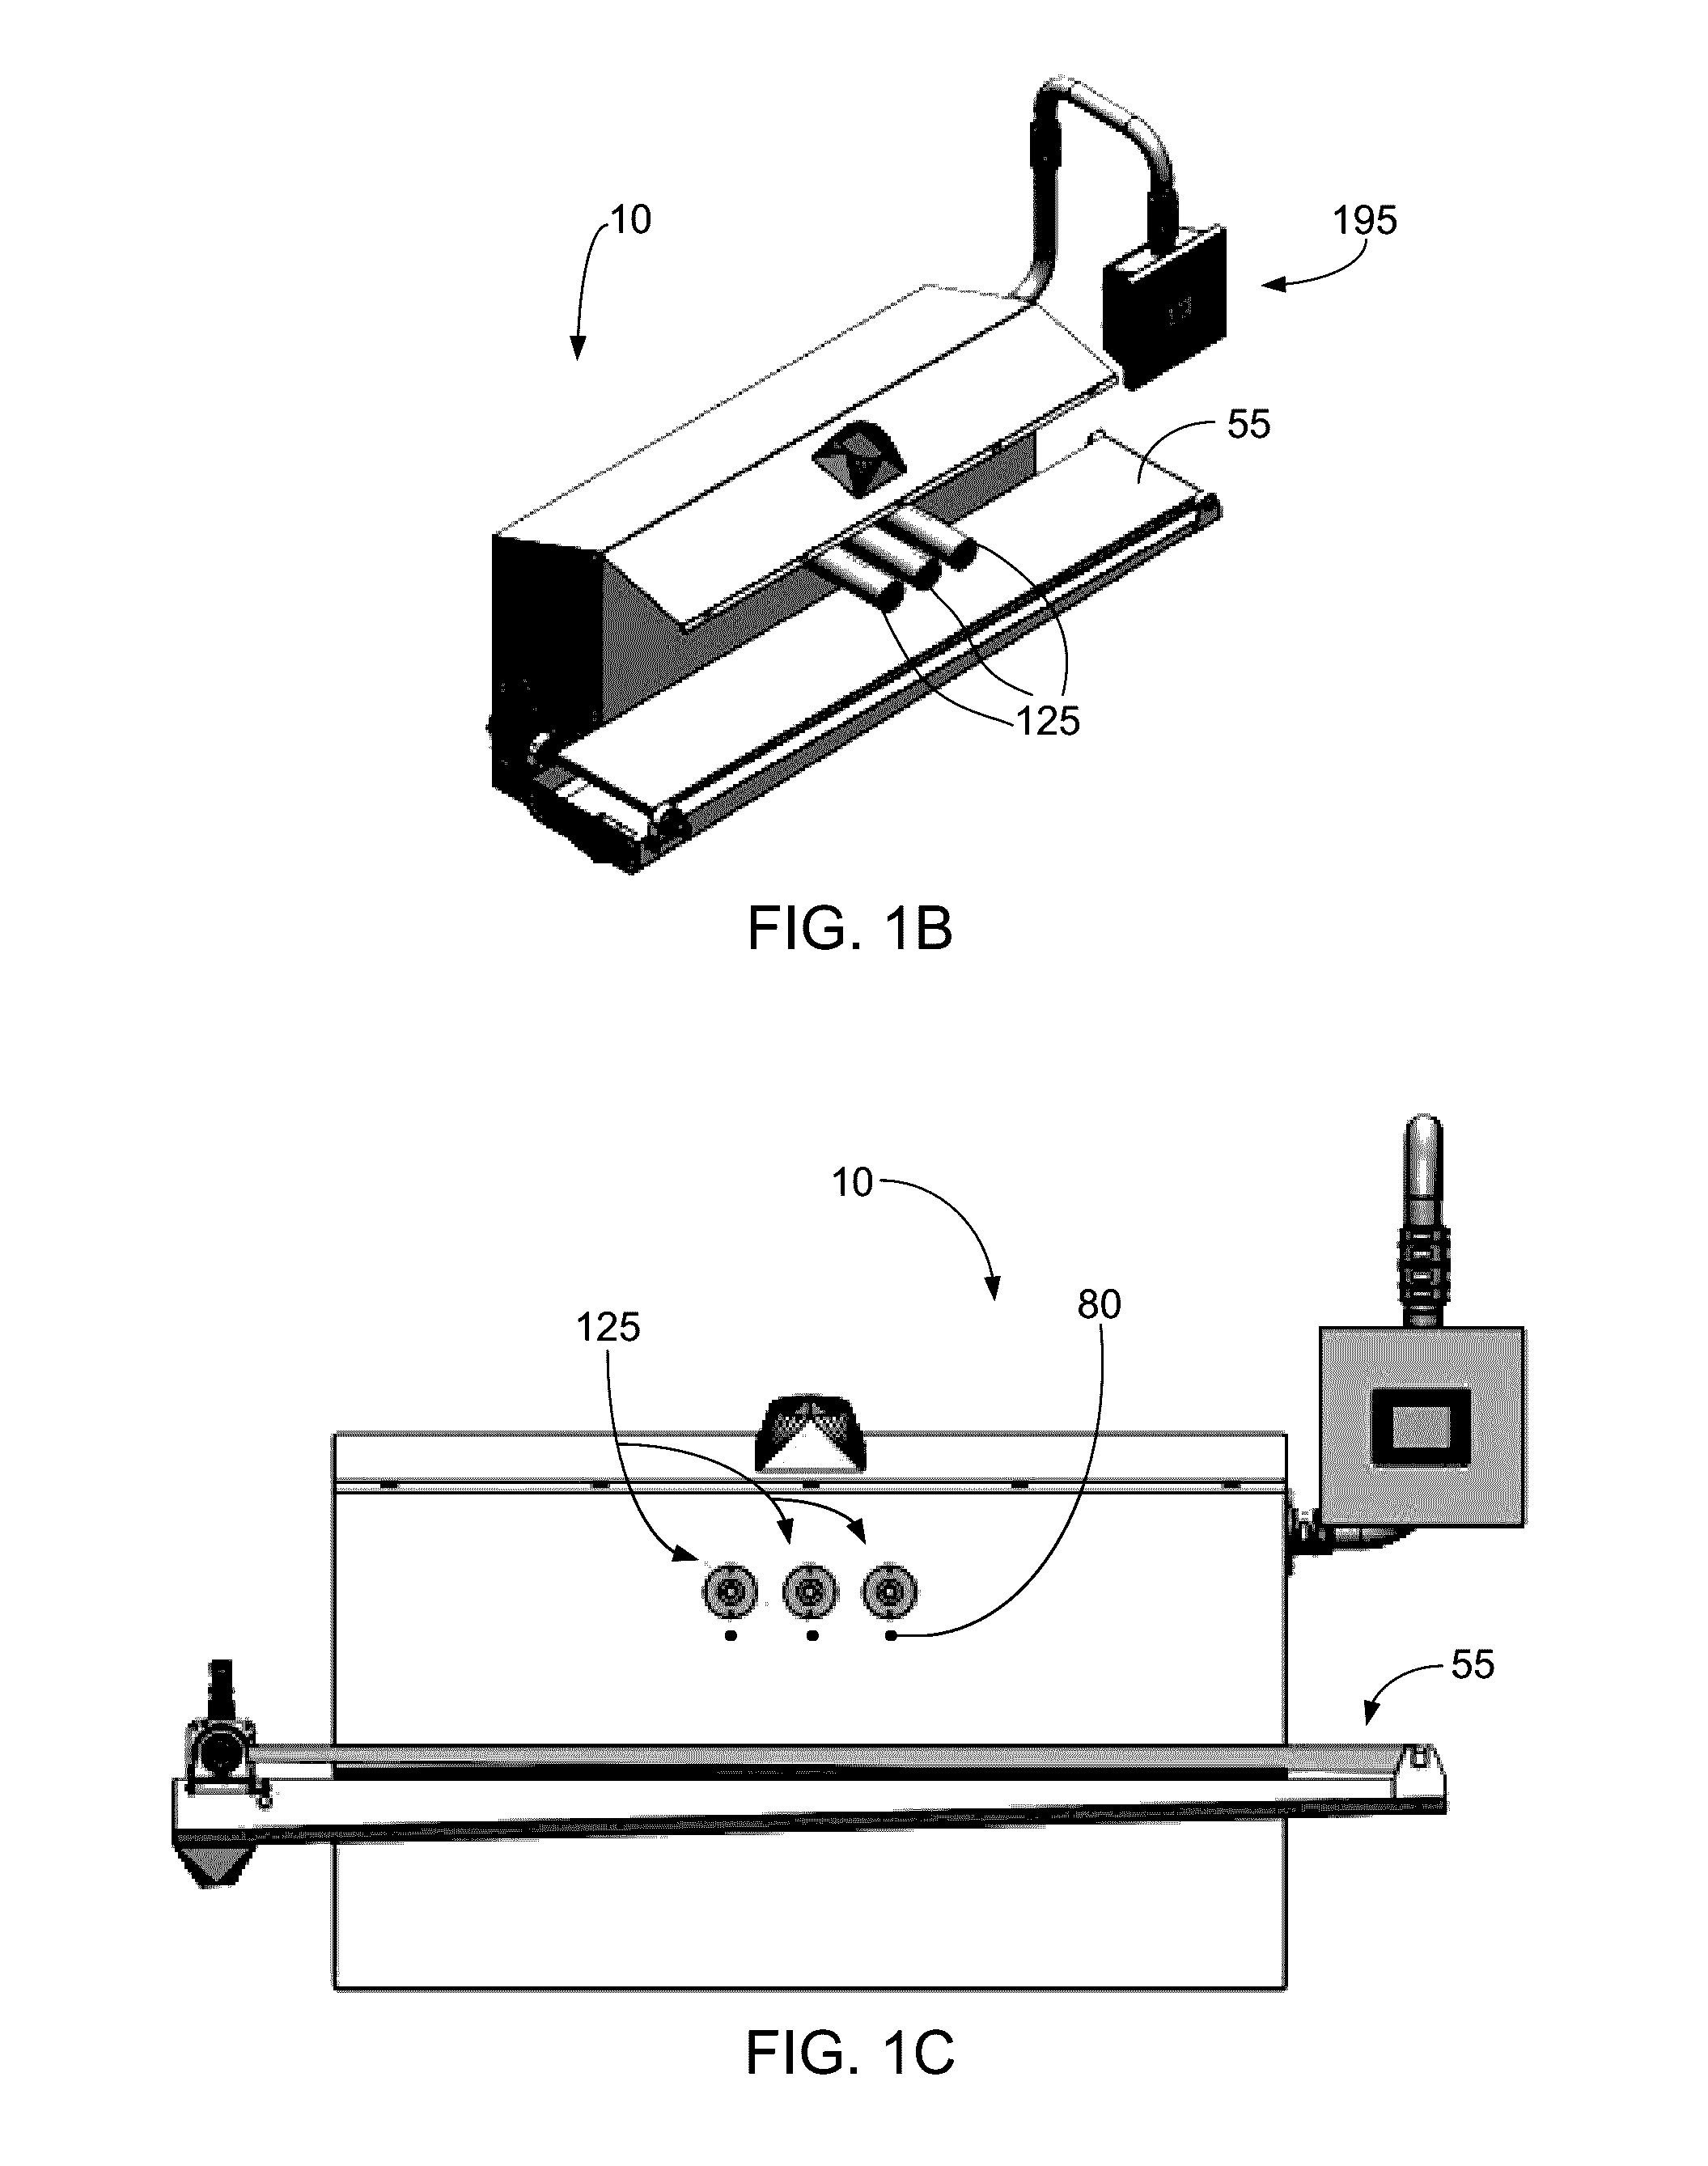 Systems and methods for providing food intervention and tenderization